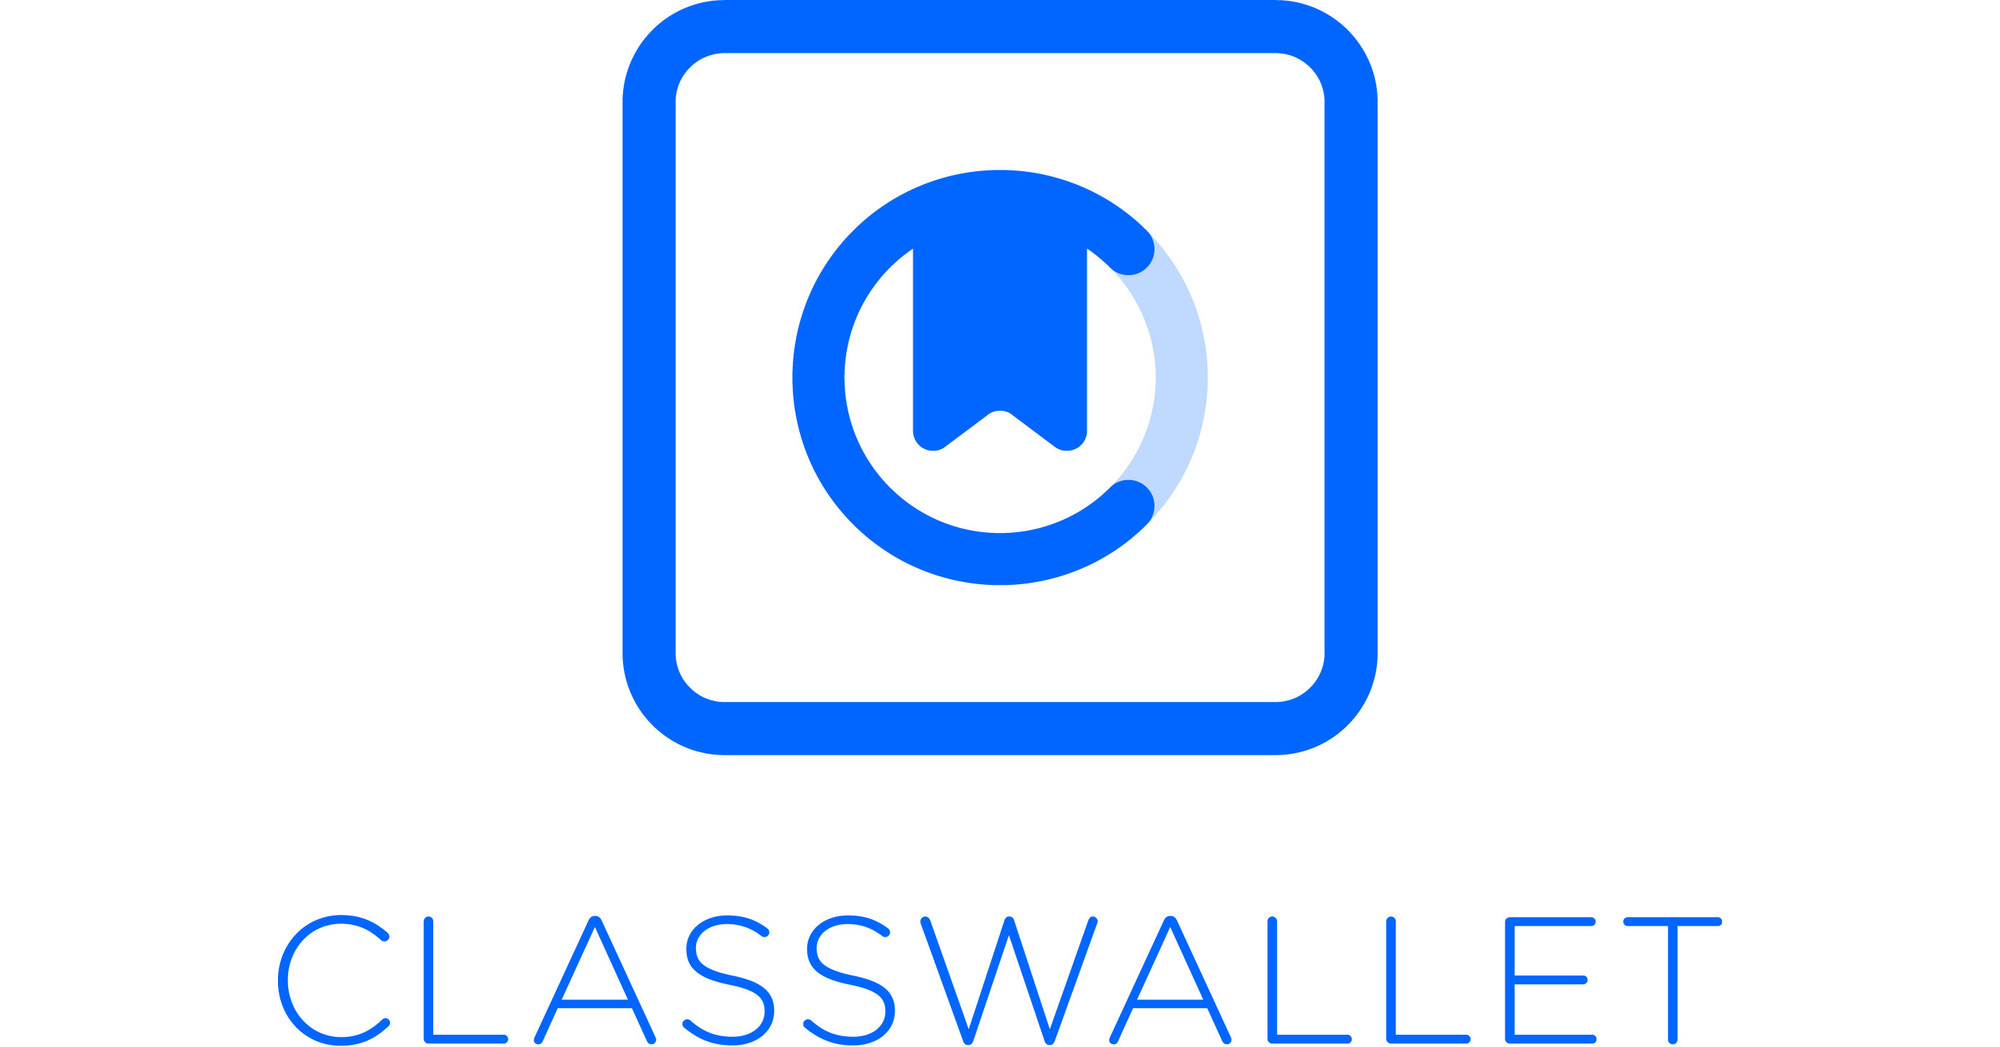 ClassWallet Continues Strong Growth in 2022 Booking Over $1 Billion in Business and a More Than Doubling of Revenue